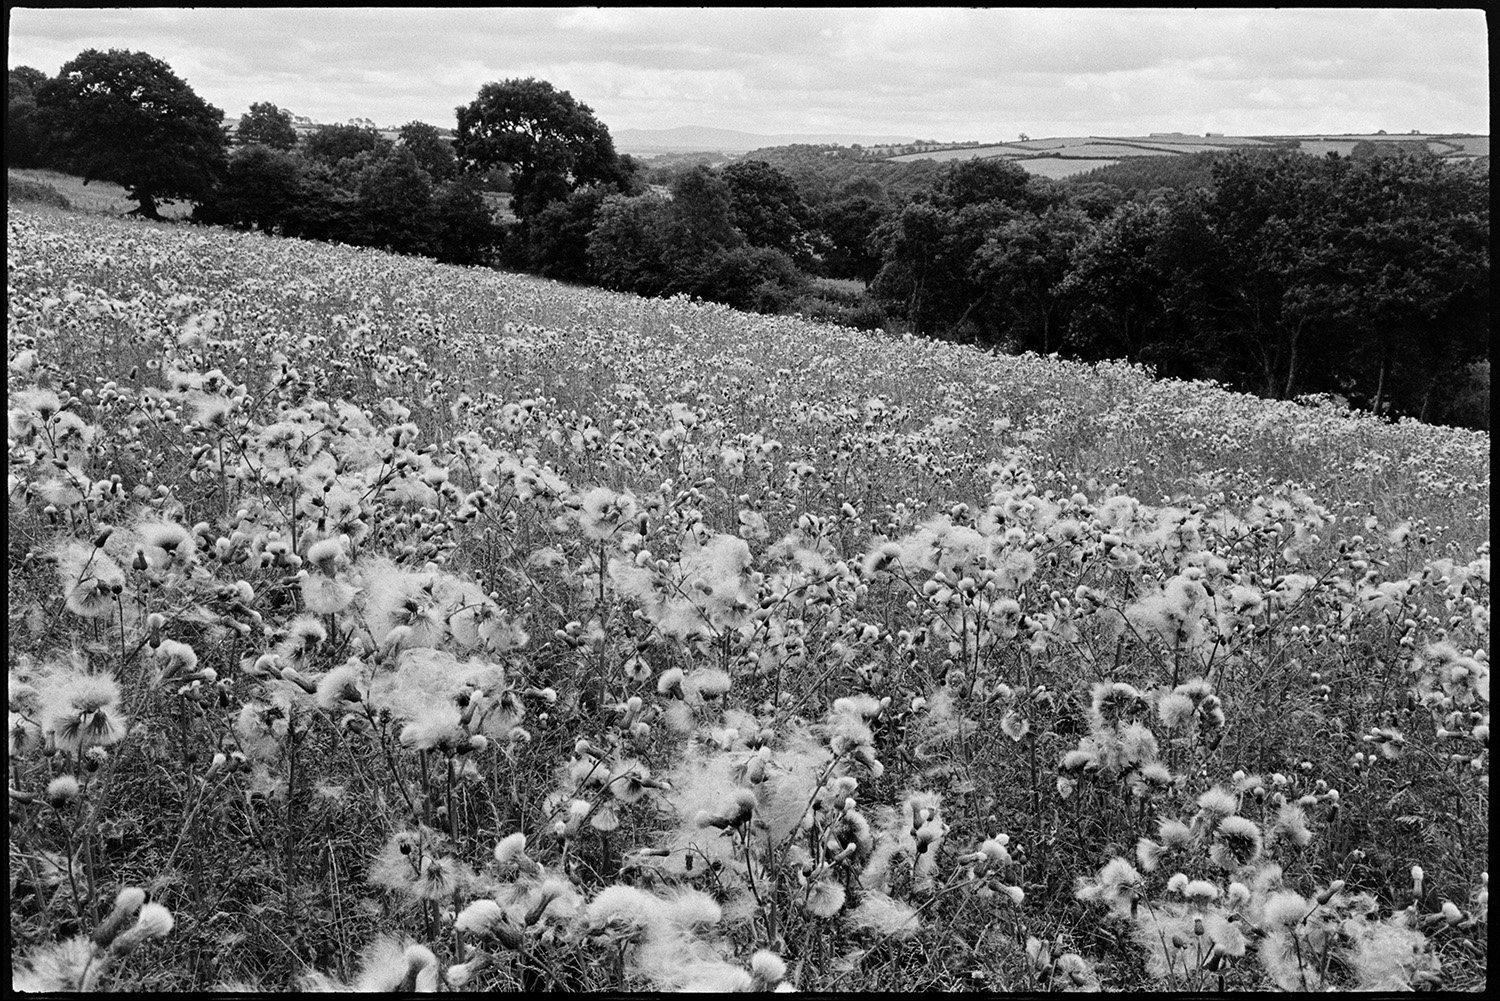 Field of thistledown. 
[A field of thistledown with woodland in the background, at Addisford, Dolton.]